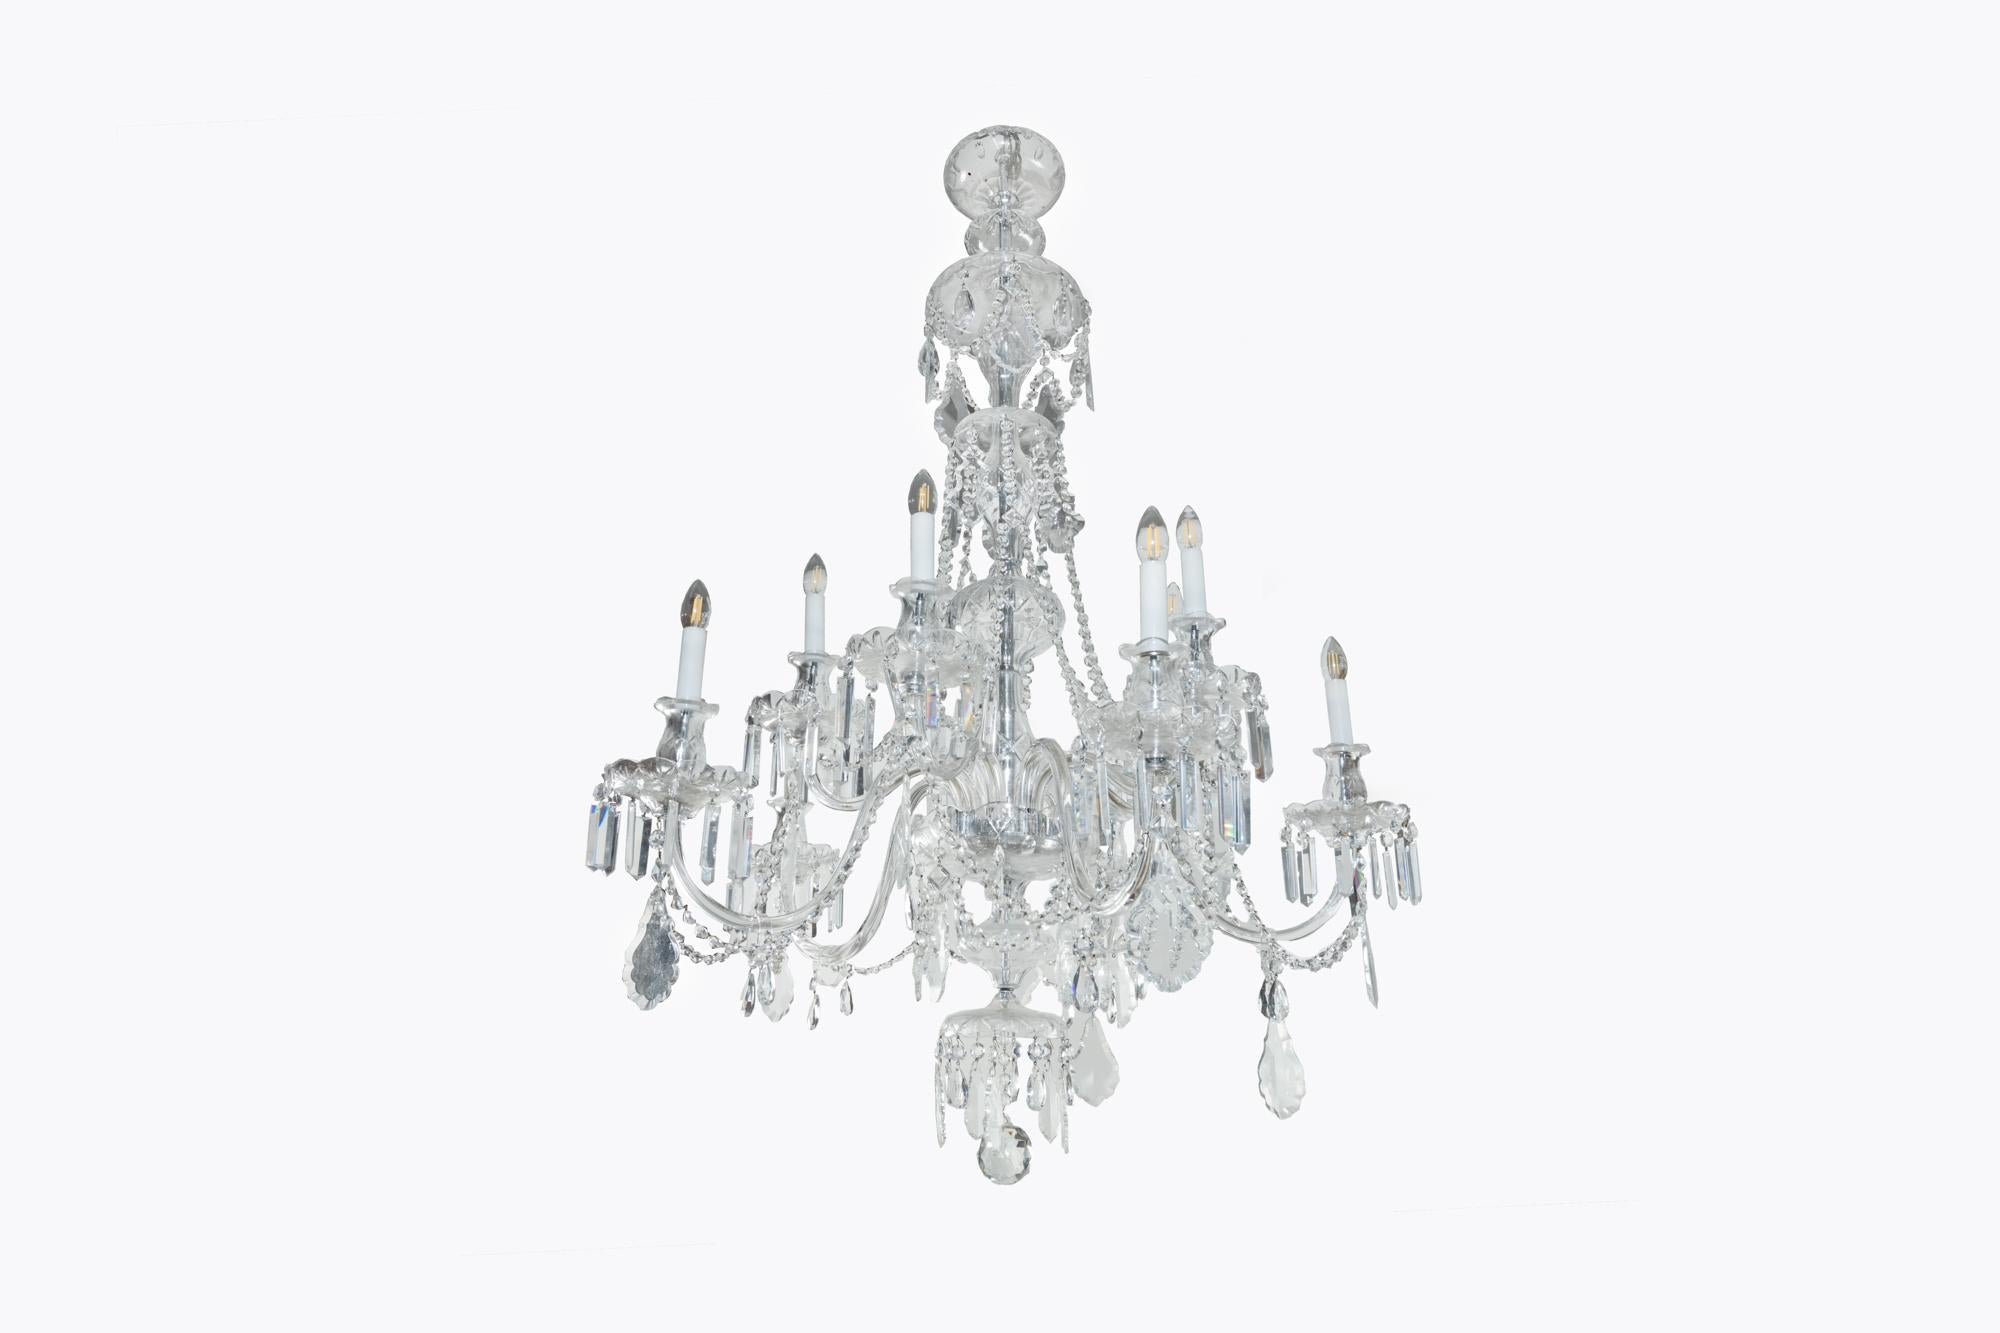 Early 20th Century English glass chandelier with 10 arms and cut glass drip pans. It originally hung in the drawing room of an 18th Century estate house outside Bath in England.